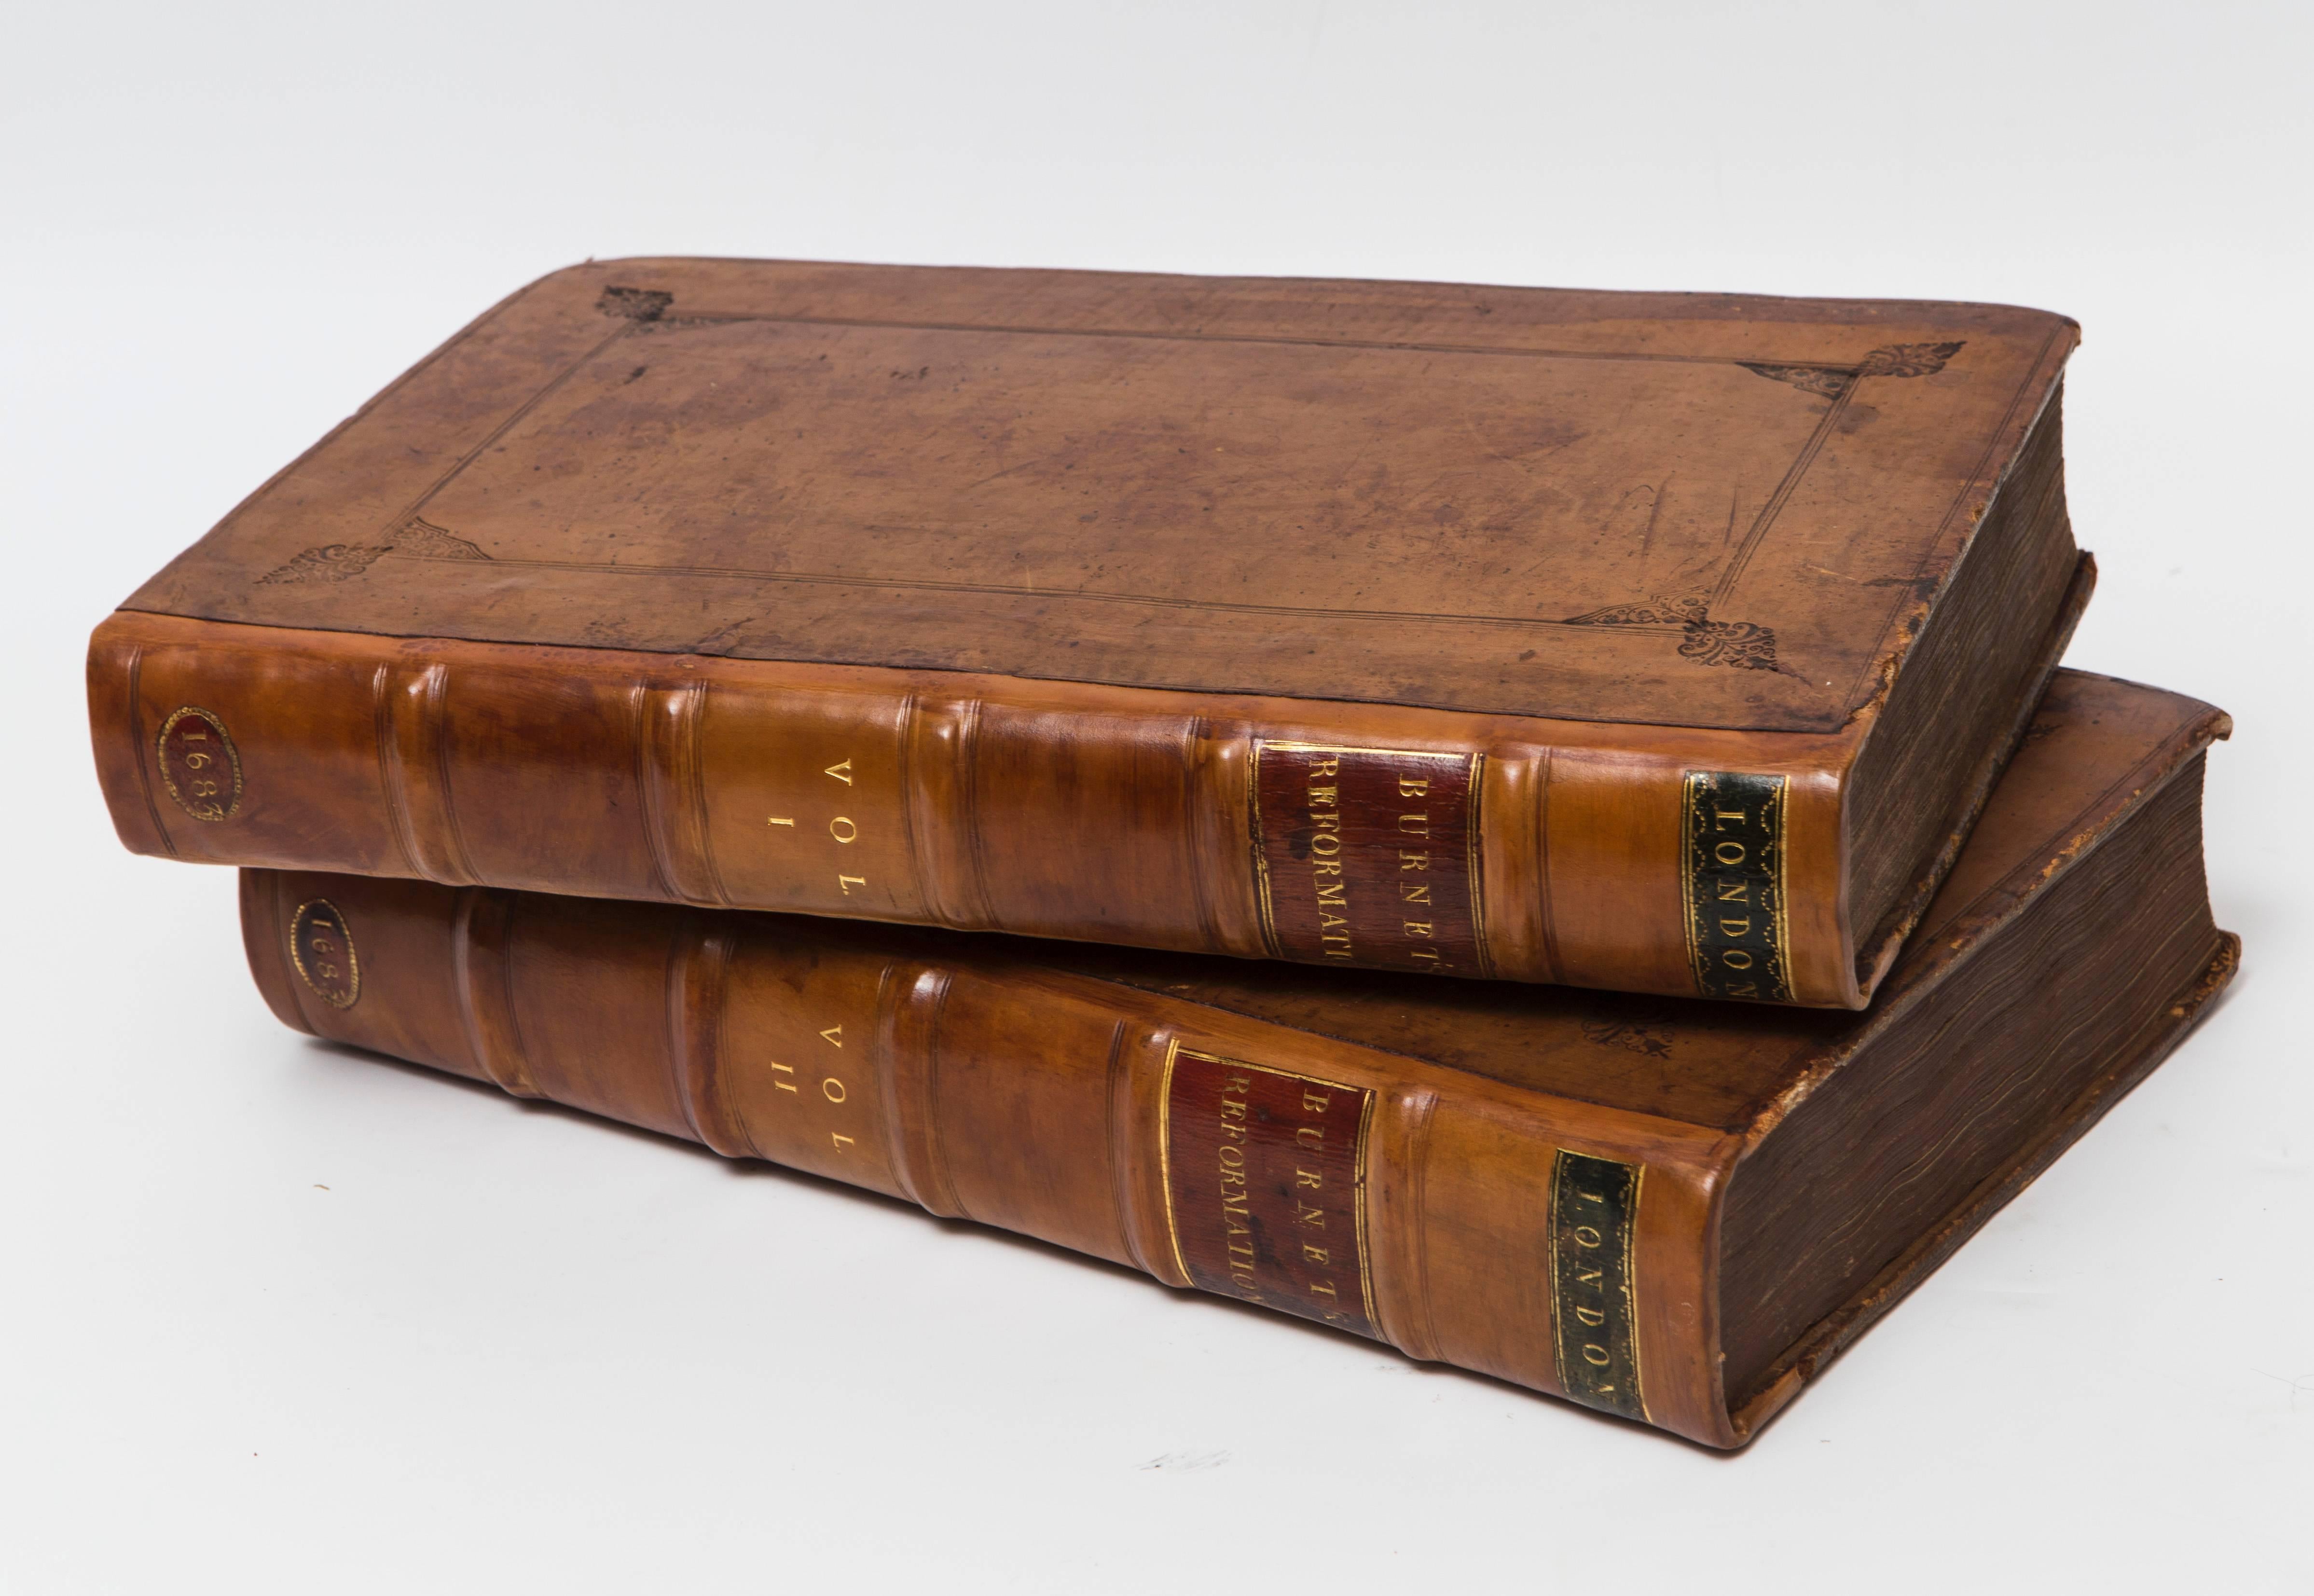 Beautiful leather bound set of books by Gilbert Burnet, D.D. on the history of the Reformation. Published in 1683. Would make a wonderful edition to any collection.